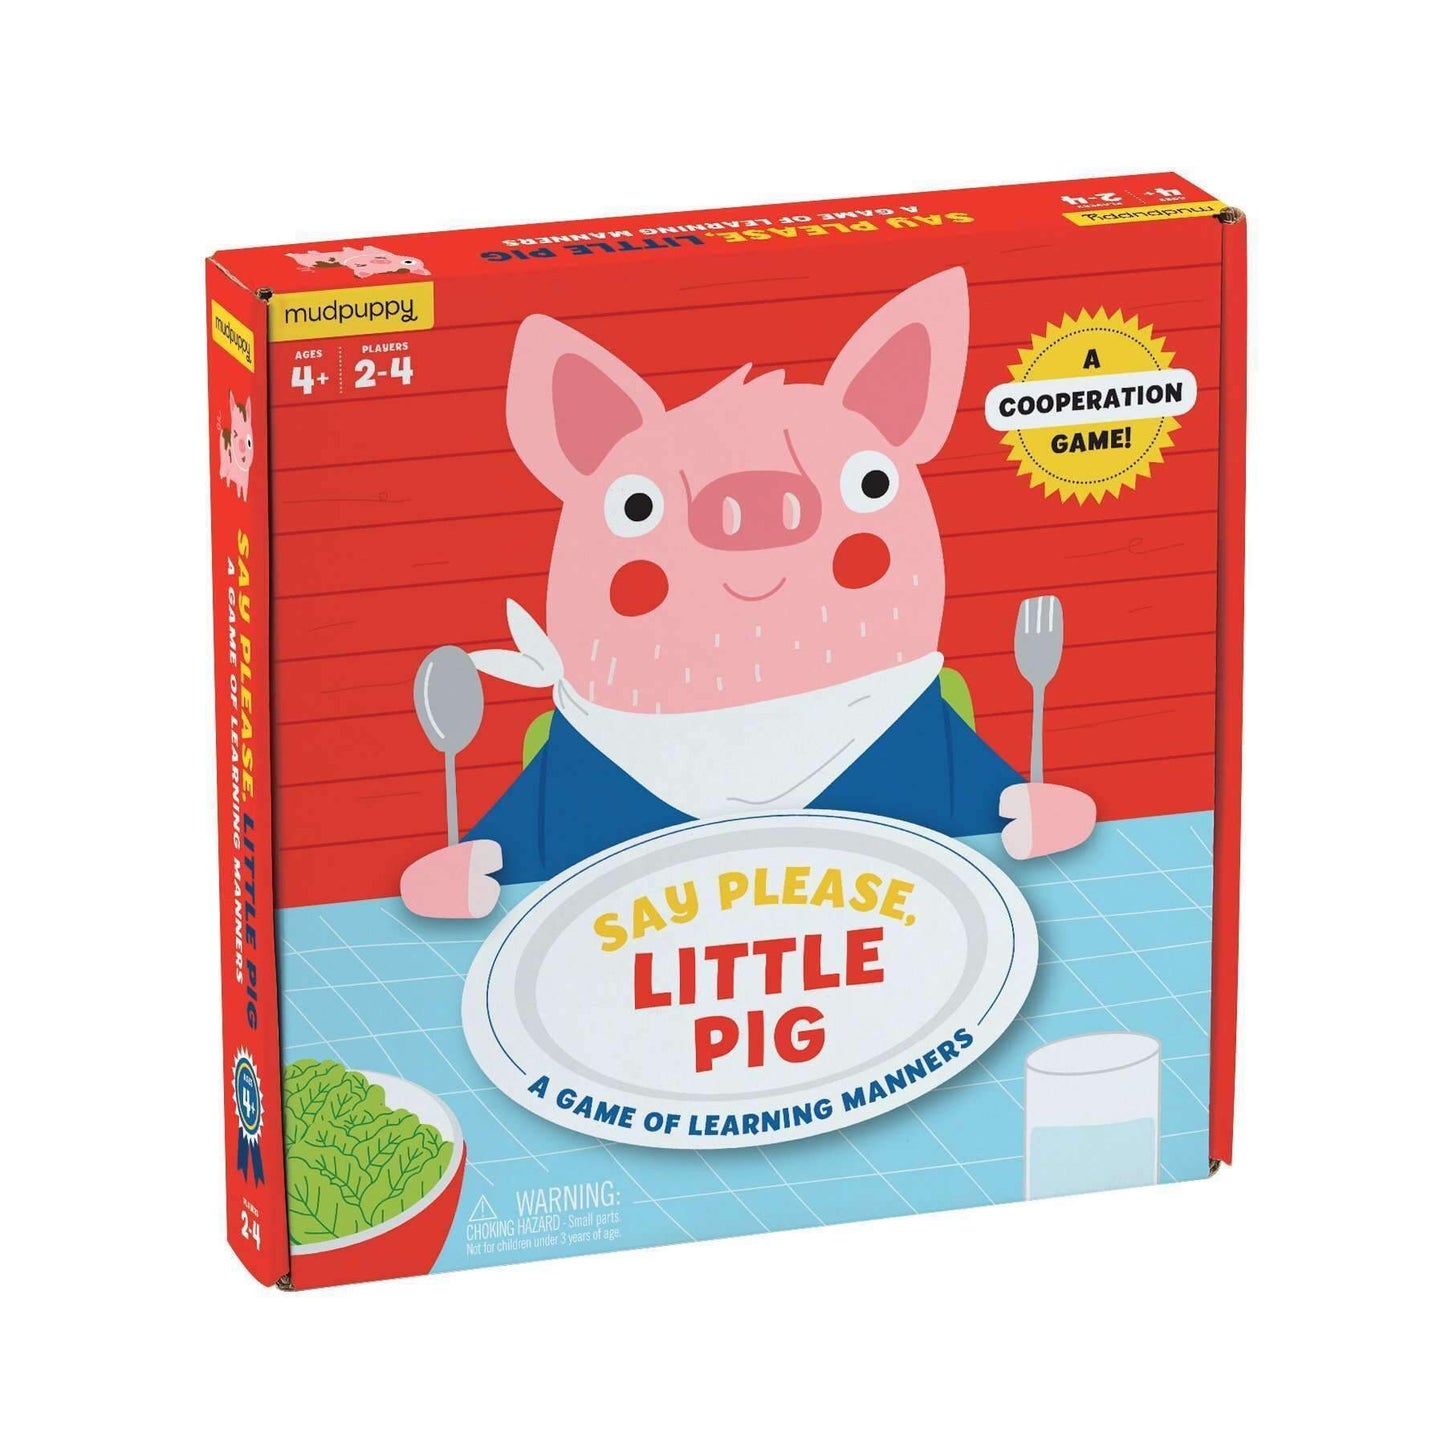 Say Please Little Pig - Cooperation Game